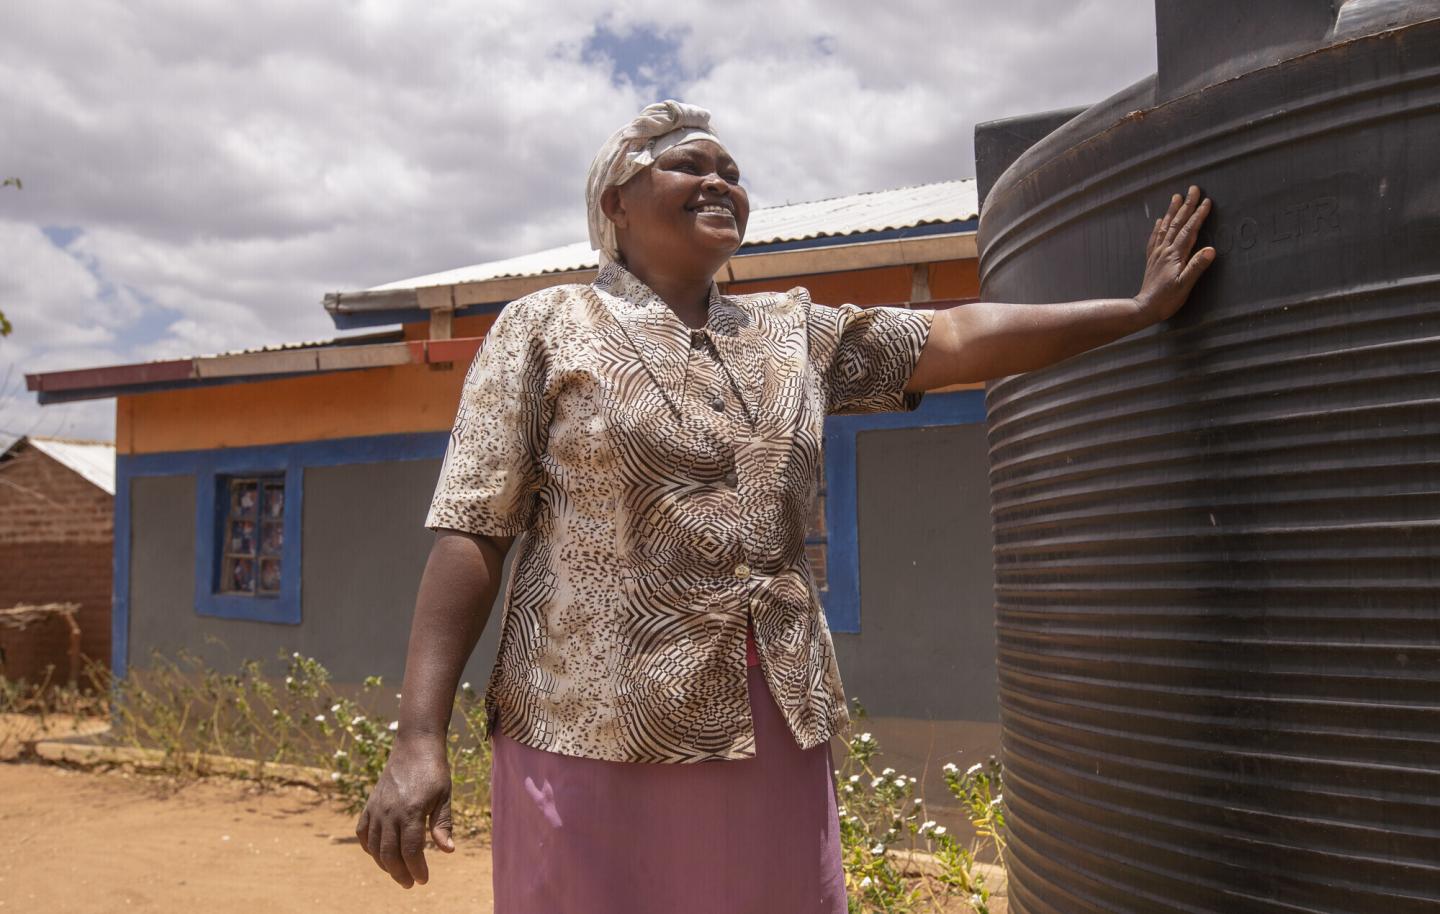 A Kenyan woman stands with her arm is outstretched, touching a rain barrel.